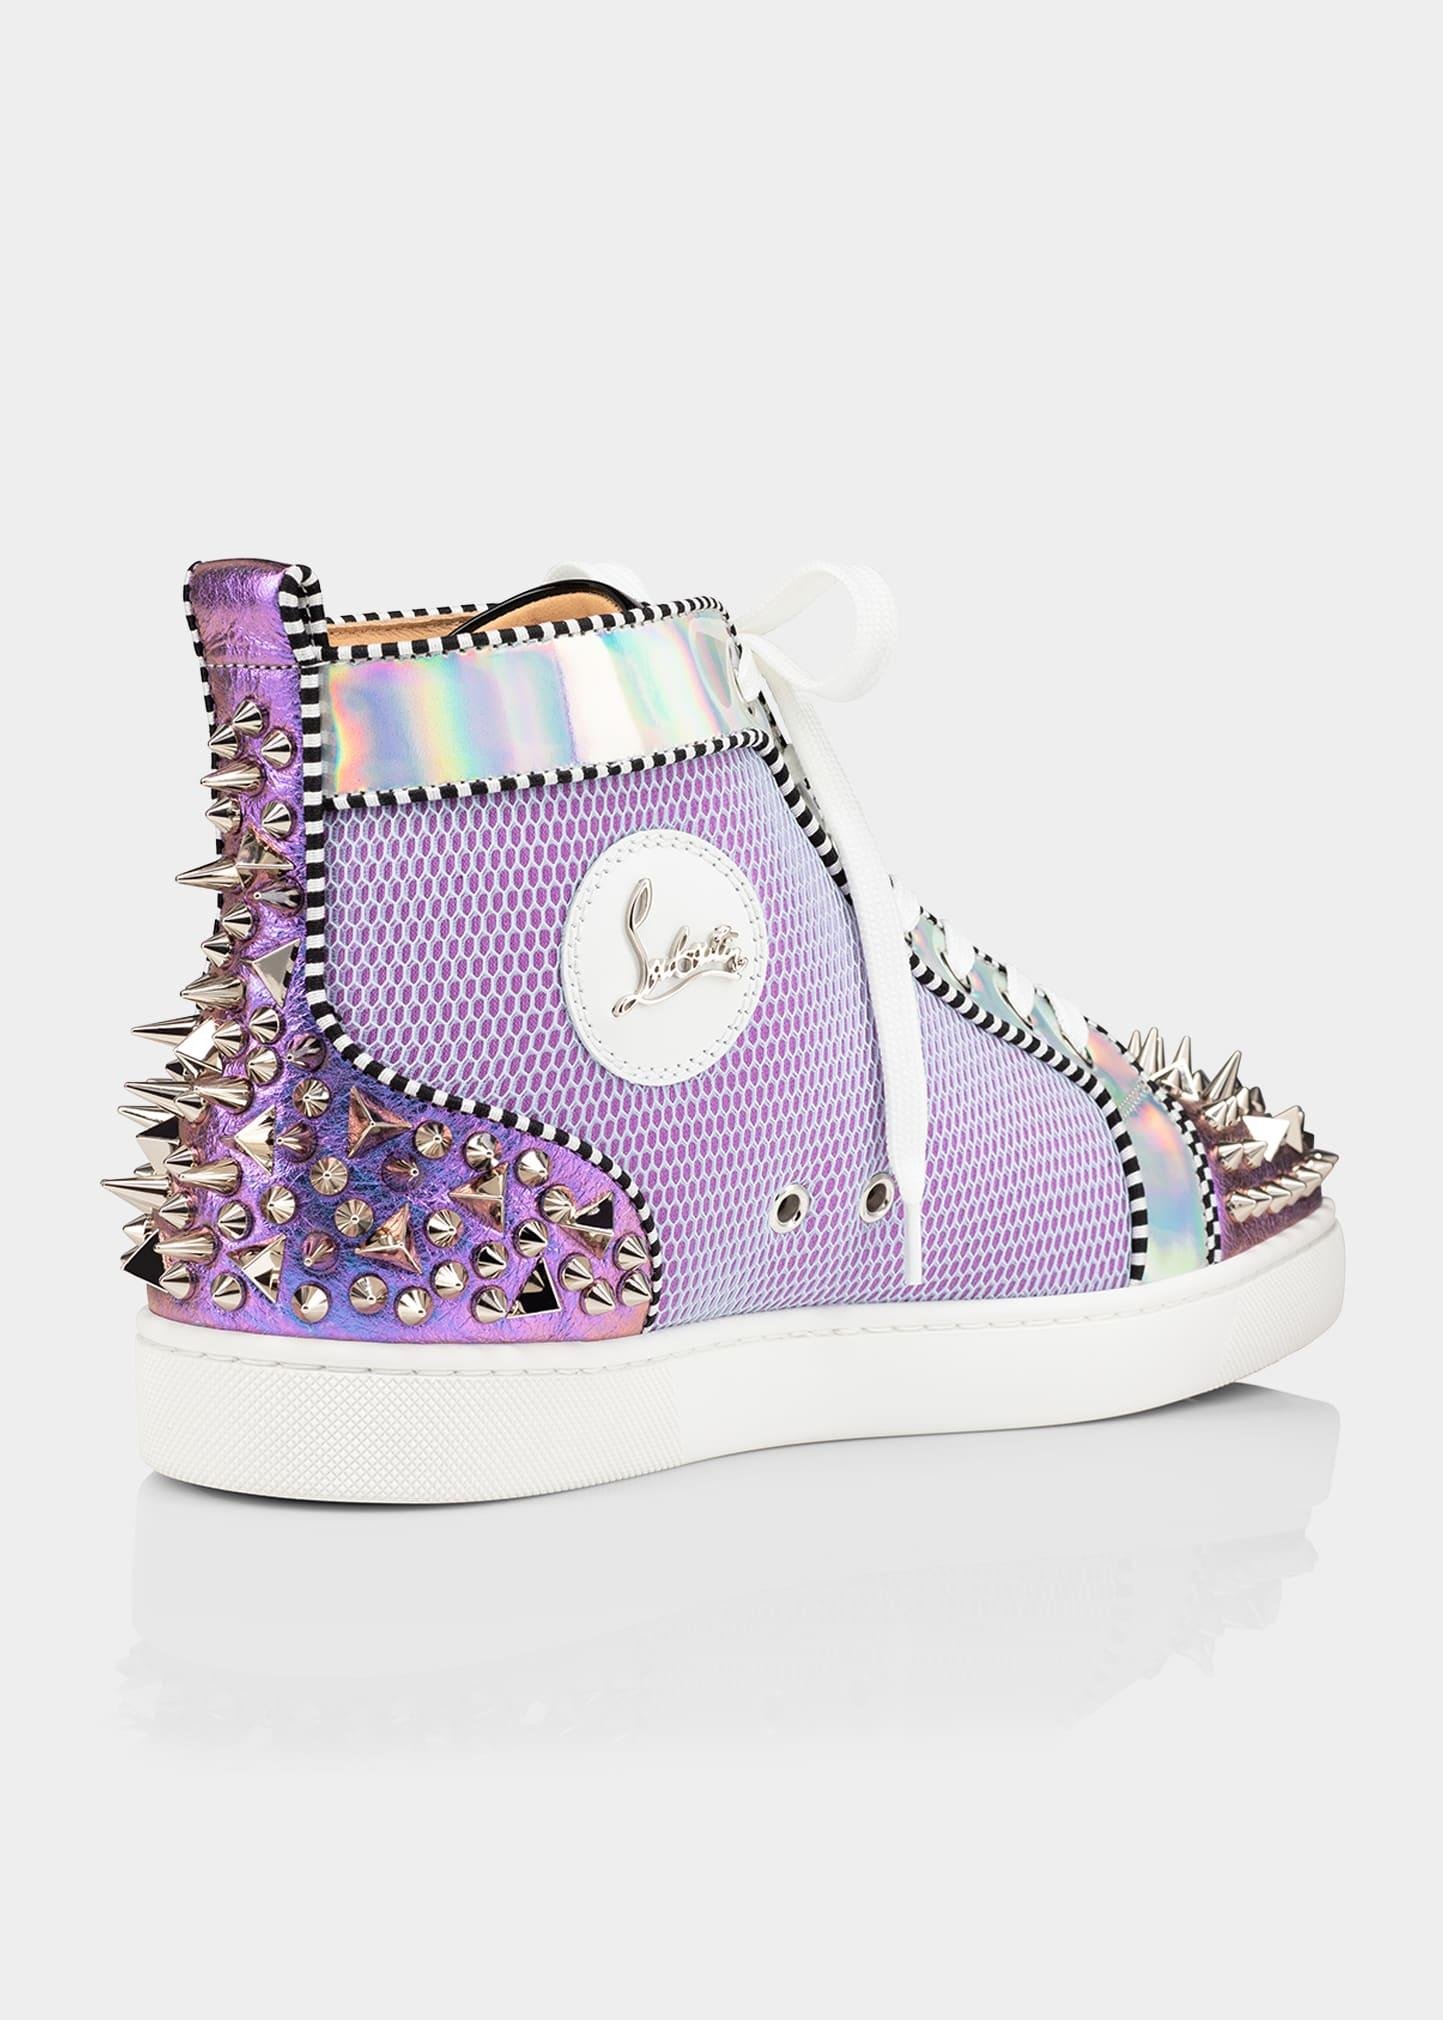 Christian Louboutin Lou Pik Pik 2 Orlato Mesh & Leather Spiked High-top  Sneakers in Purple for Men | Lyst